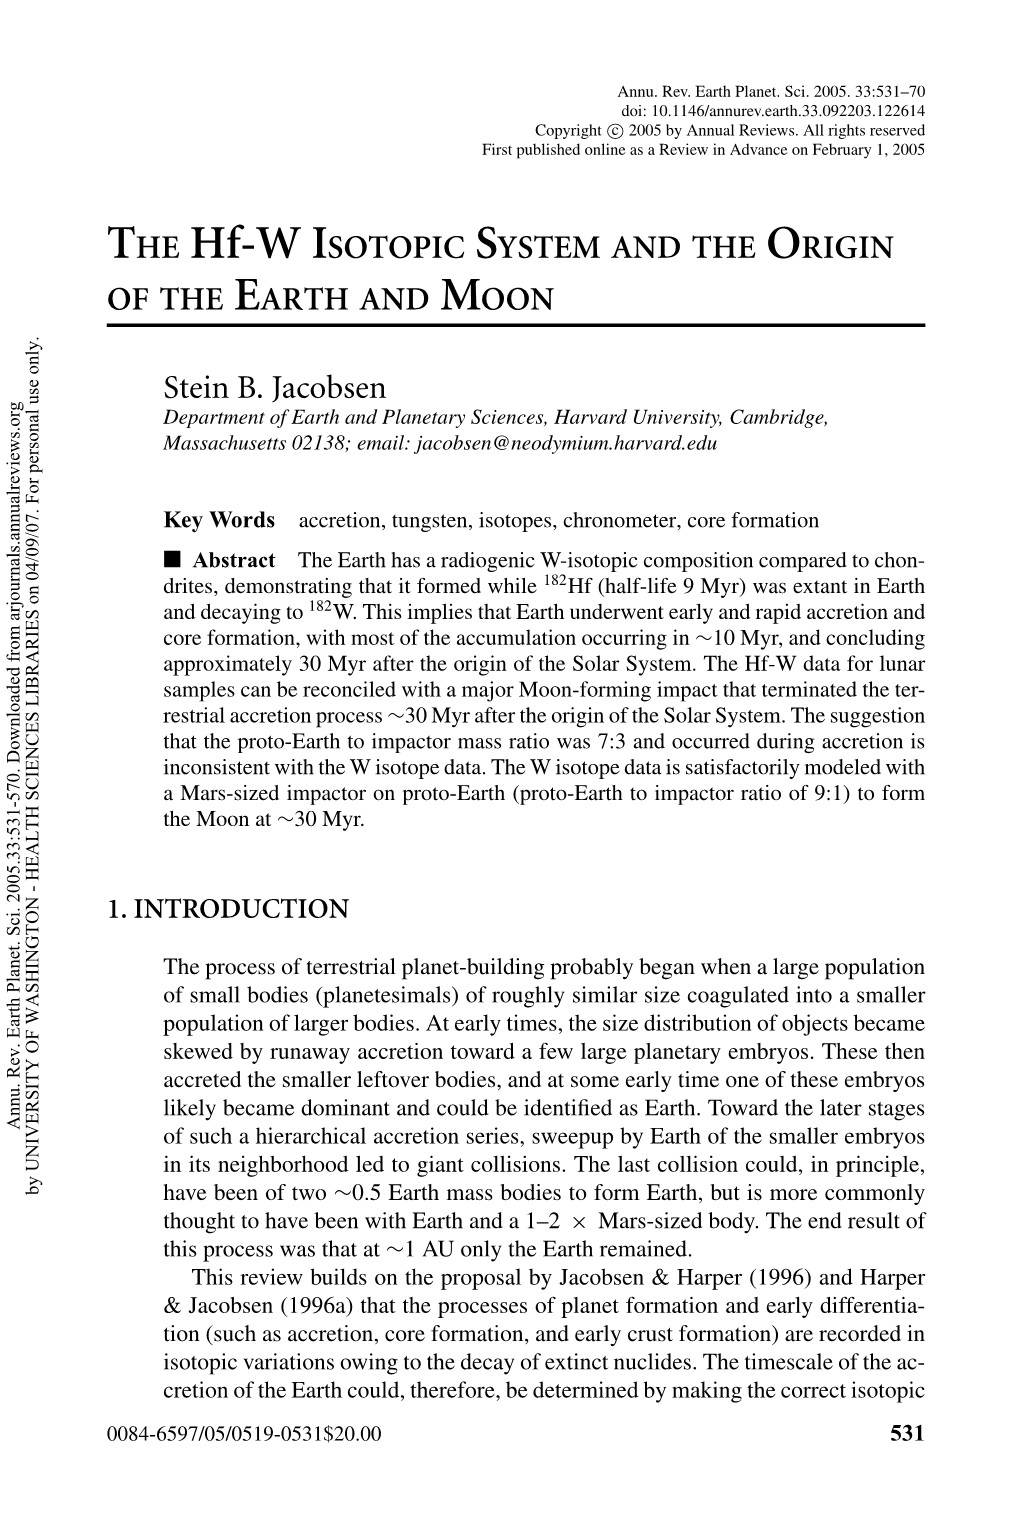 THE Hf-W ISOTOPIC SYSTEM and the ORIGIN of the EARTH and MOON